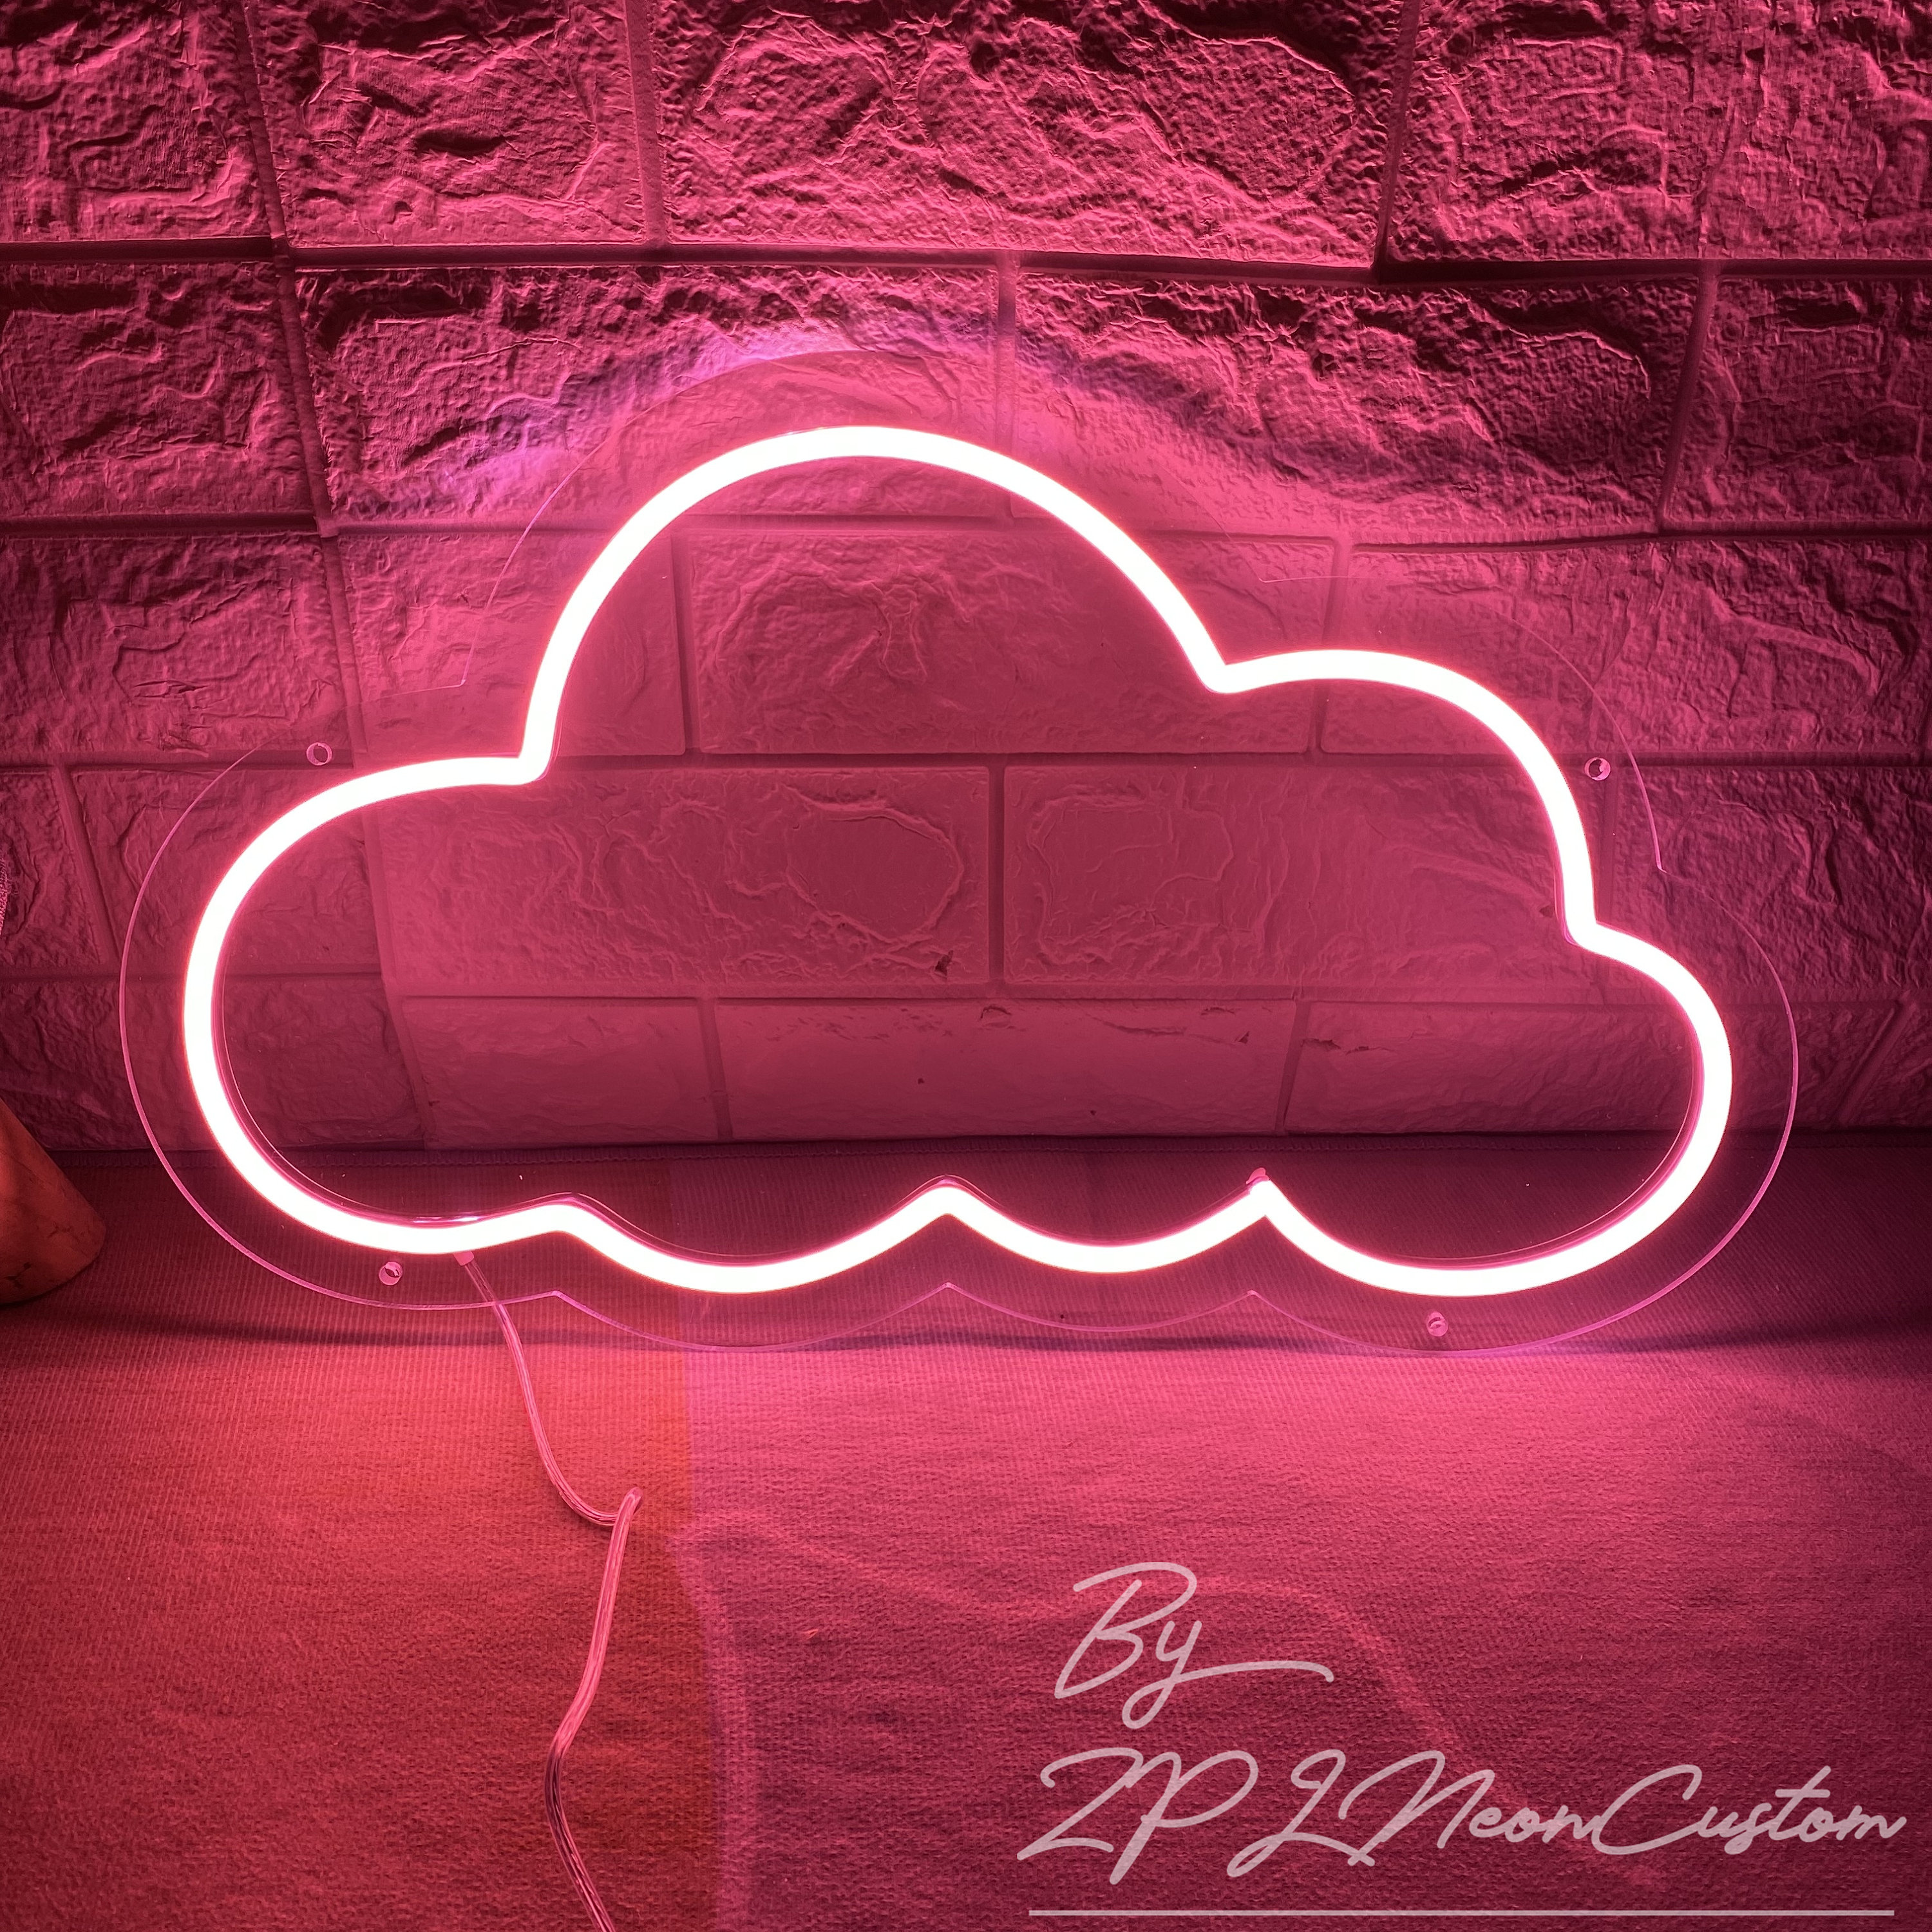 LED Lights Game Cloud Neon Light Sign Bedroom Decor Neon Sign Night Lamp  for Room Wall